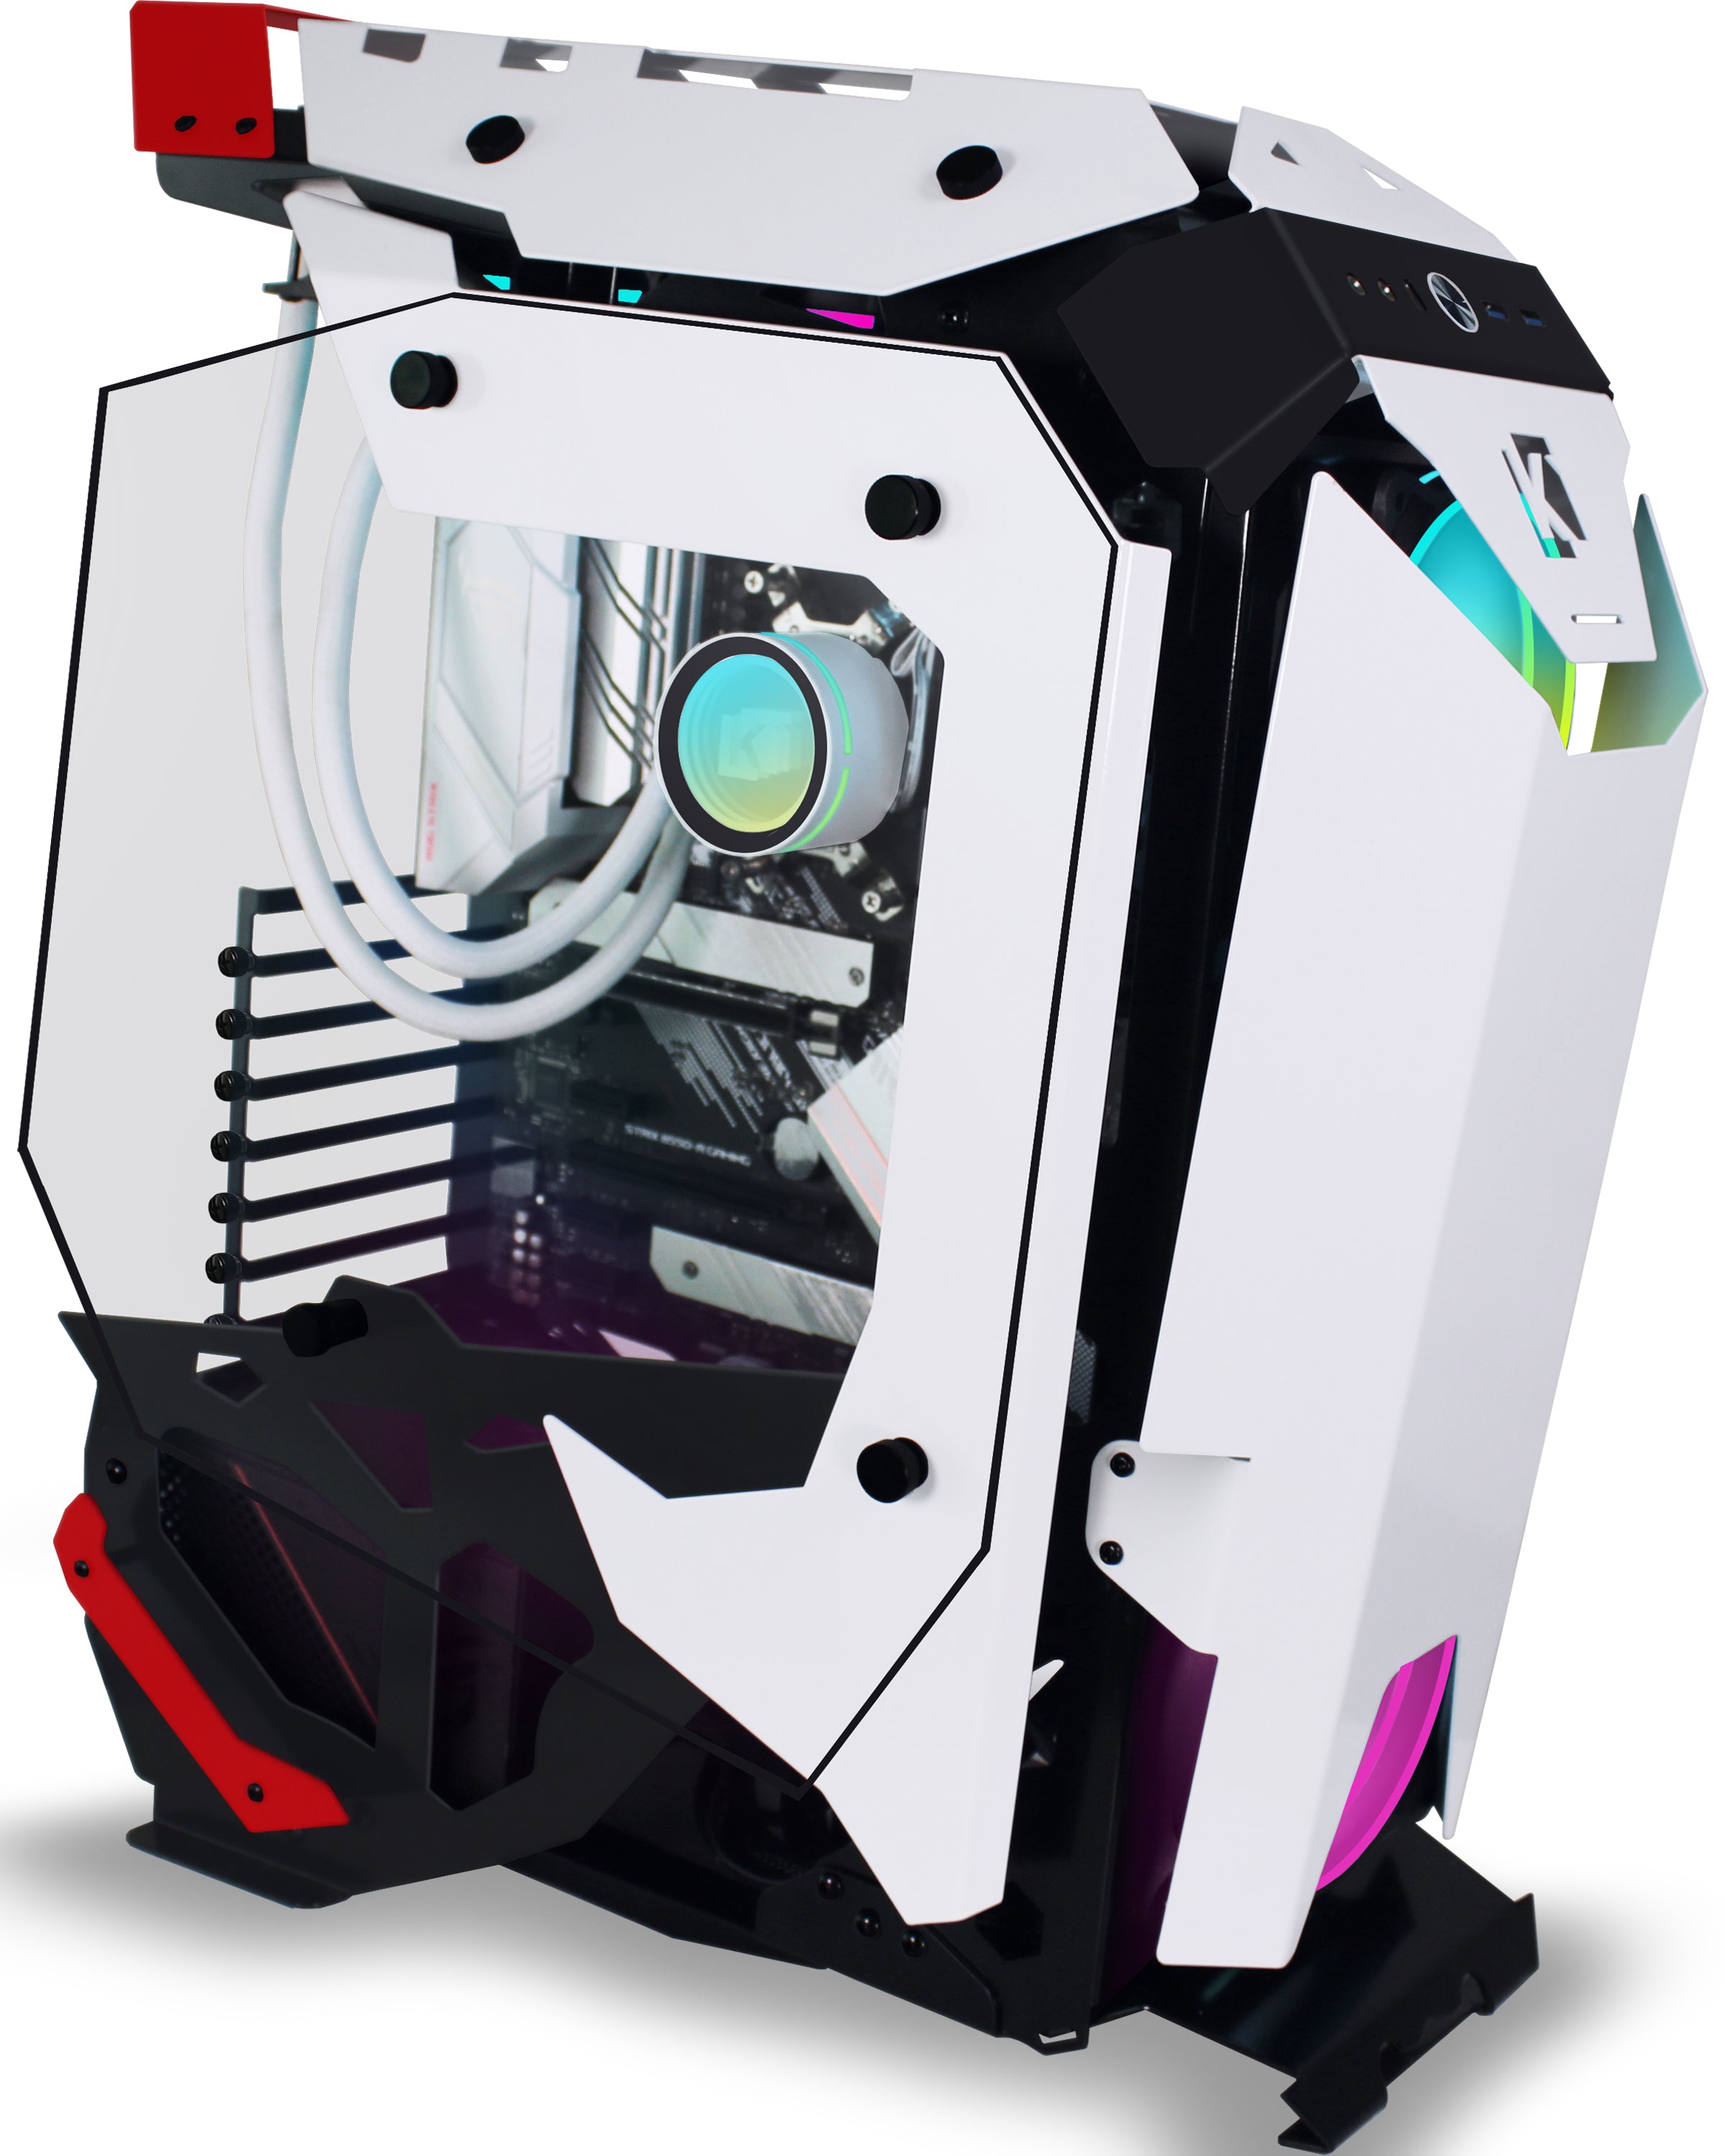 KEDIERS C650 Mech PC Case - ATX Tower Gaming Computer Case with Tempered Glass,White